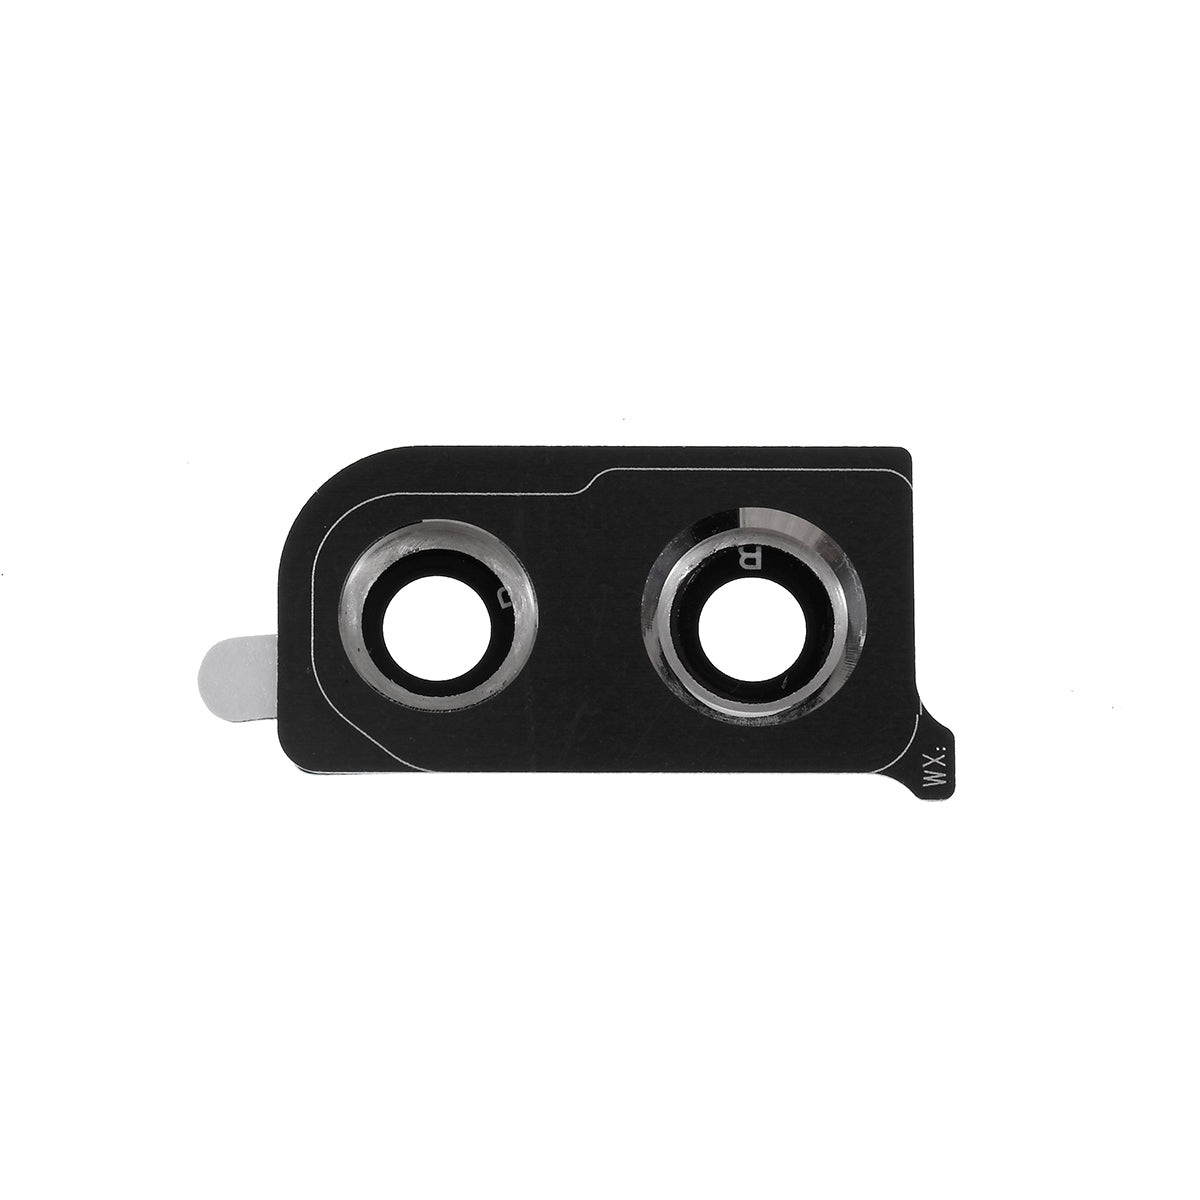 OEM Back Camera Lens Ring Cover with Glass Lens for Huawei Honor 8X/Honor View 10 Lite - Black